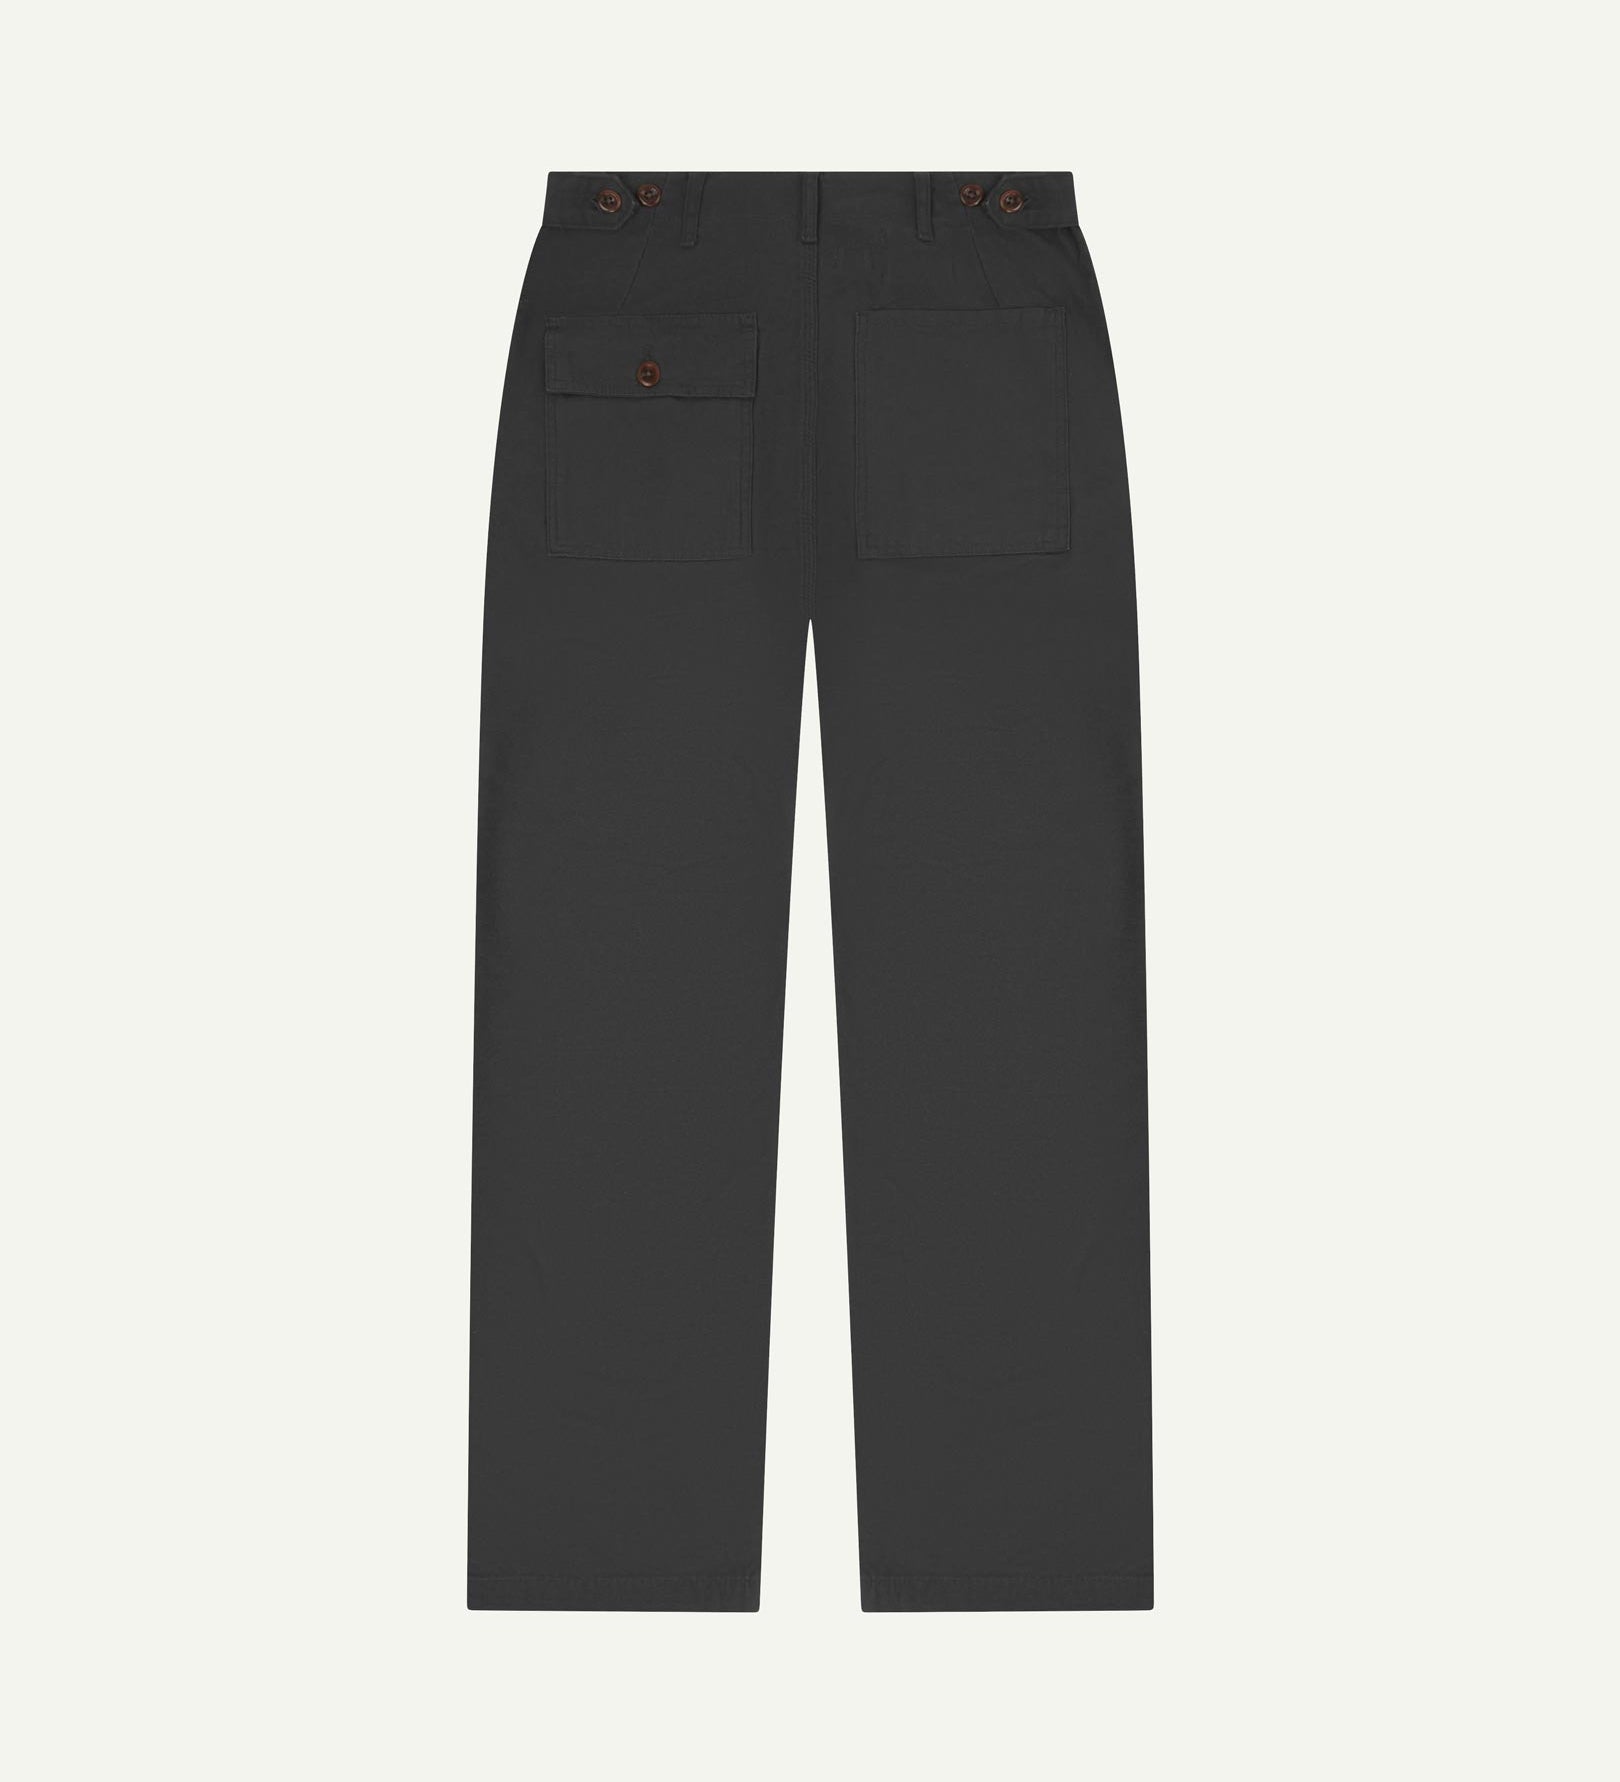 Full length back-view of charcoal-grey cotton 5005 trousers with view of rear pockets, belt loops and tapered leg fit.